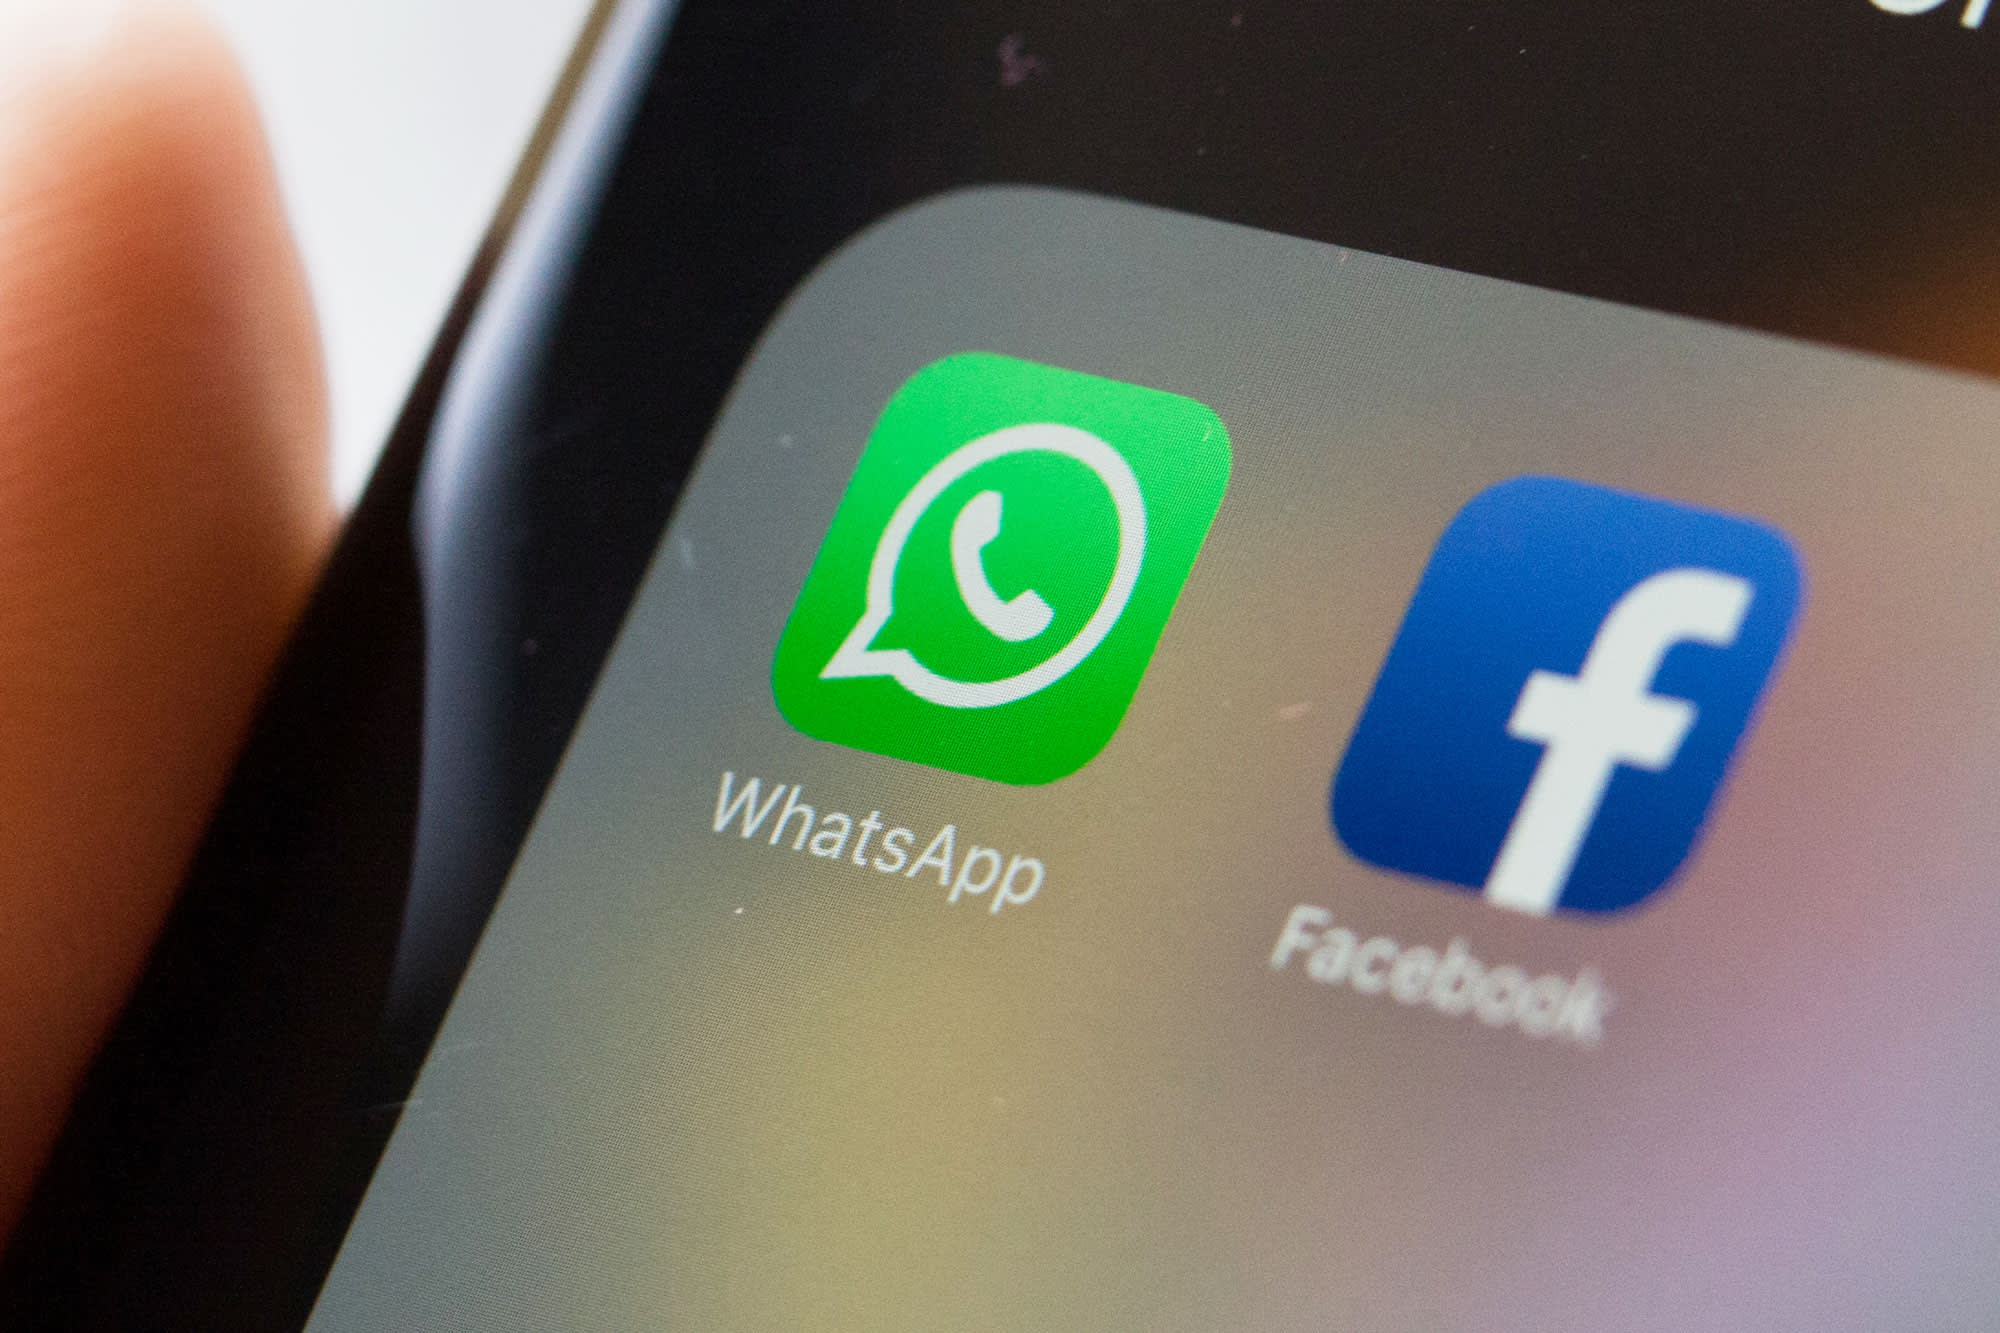 WhatsApp delays privacy update amid ‘confusion’ with Facebook data sharing